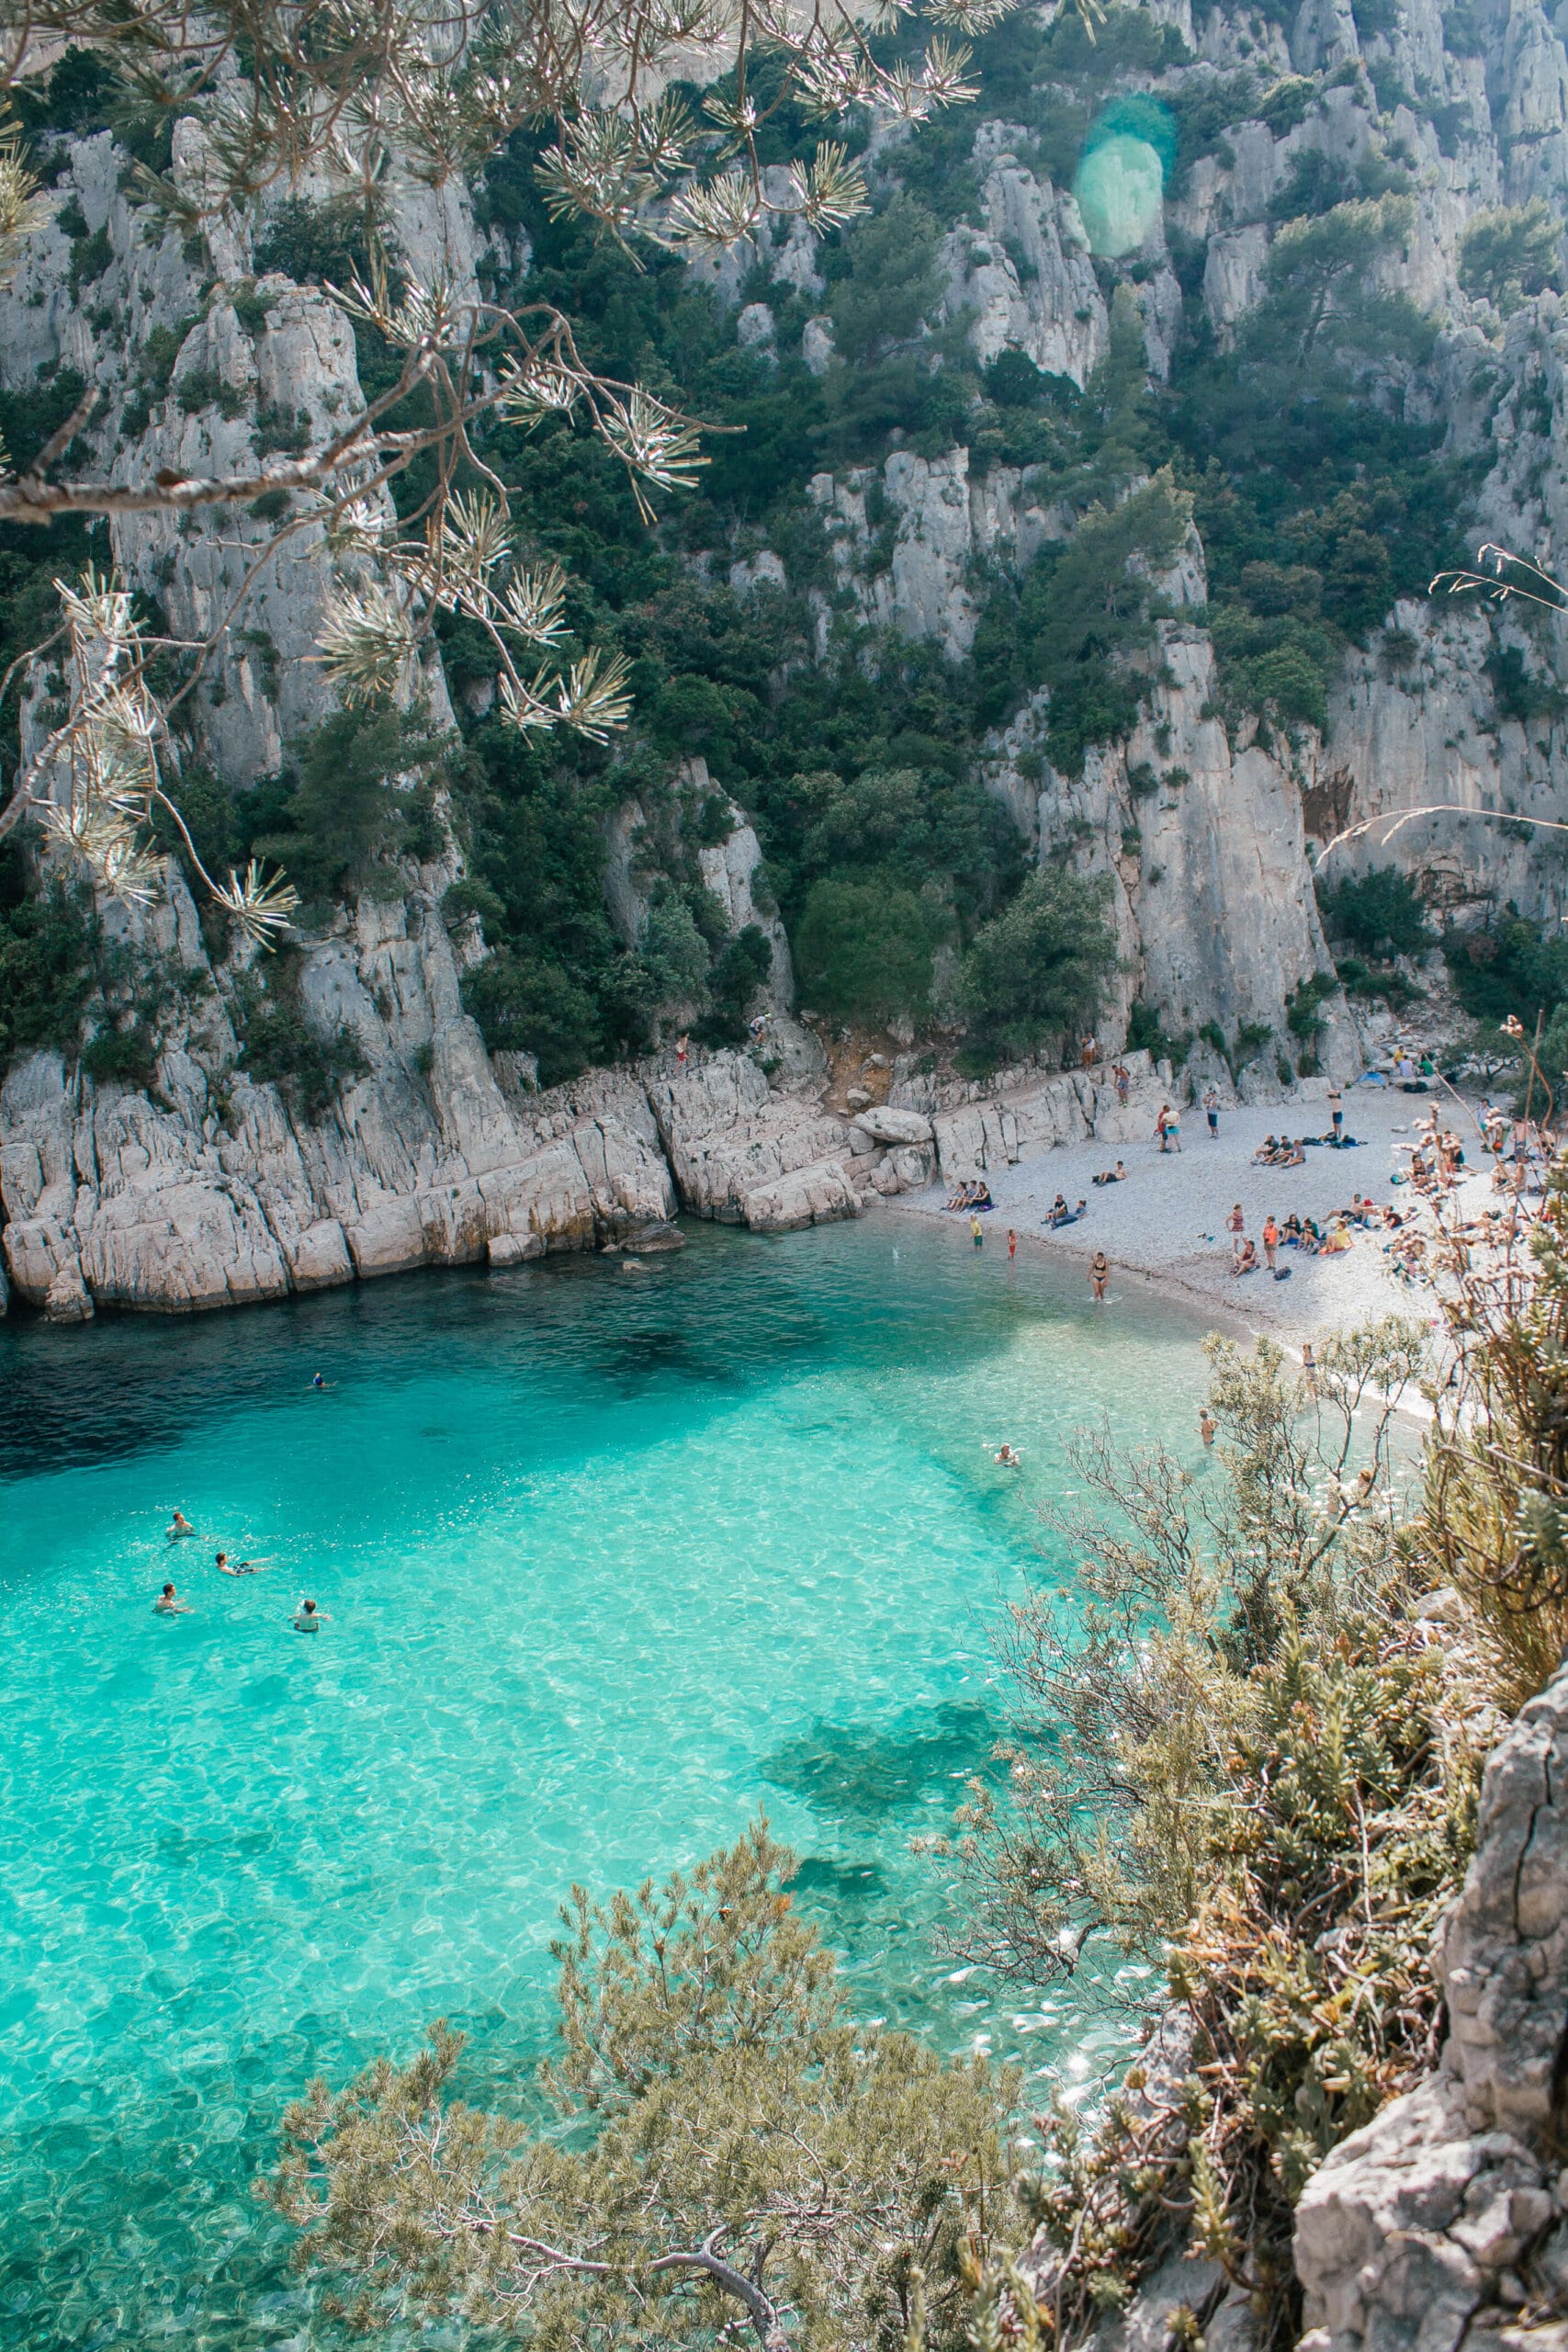 Hiking to the Beautiful Beaches of Calanques National Park in Southern France